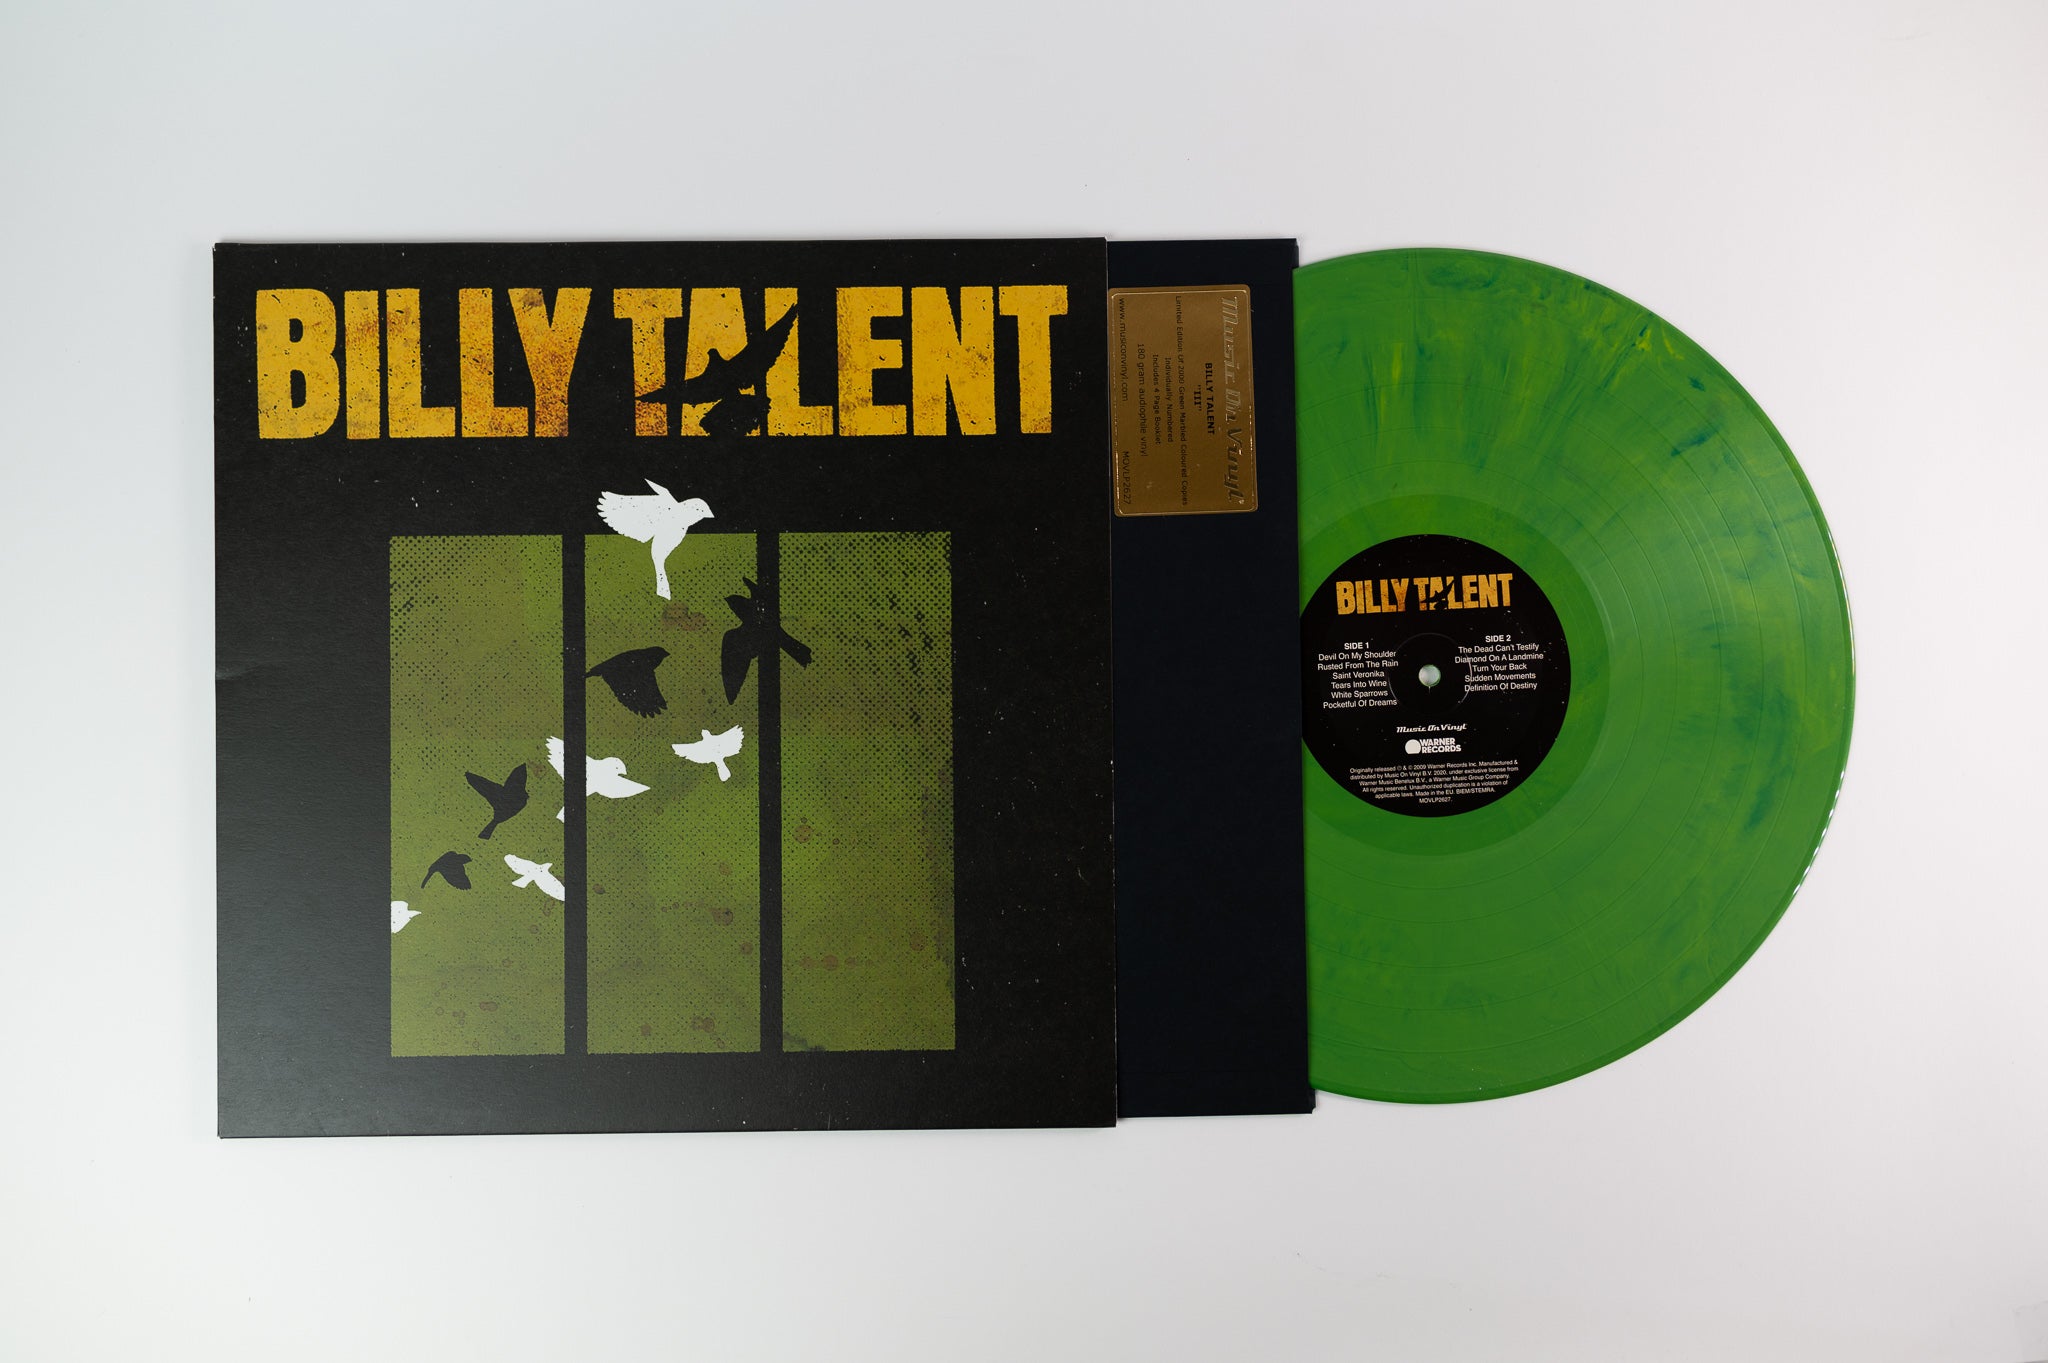 Billy Talent - Billy Talent III on Music on Vinyl Limited Numbered Green Marbled Vinyl Reissue